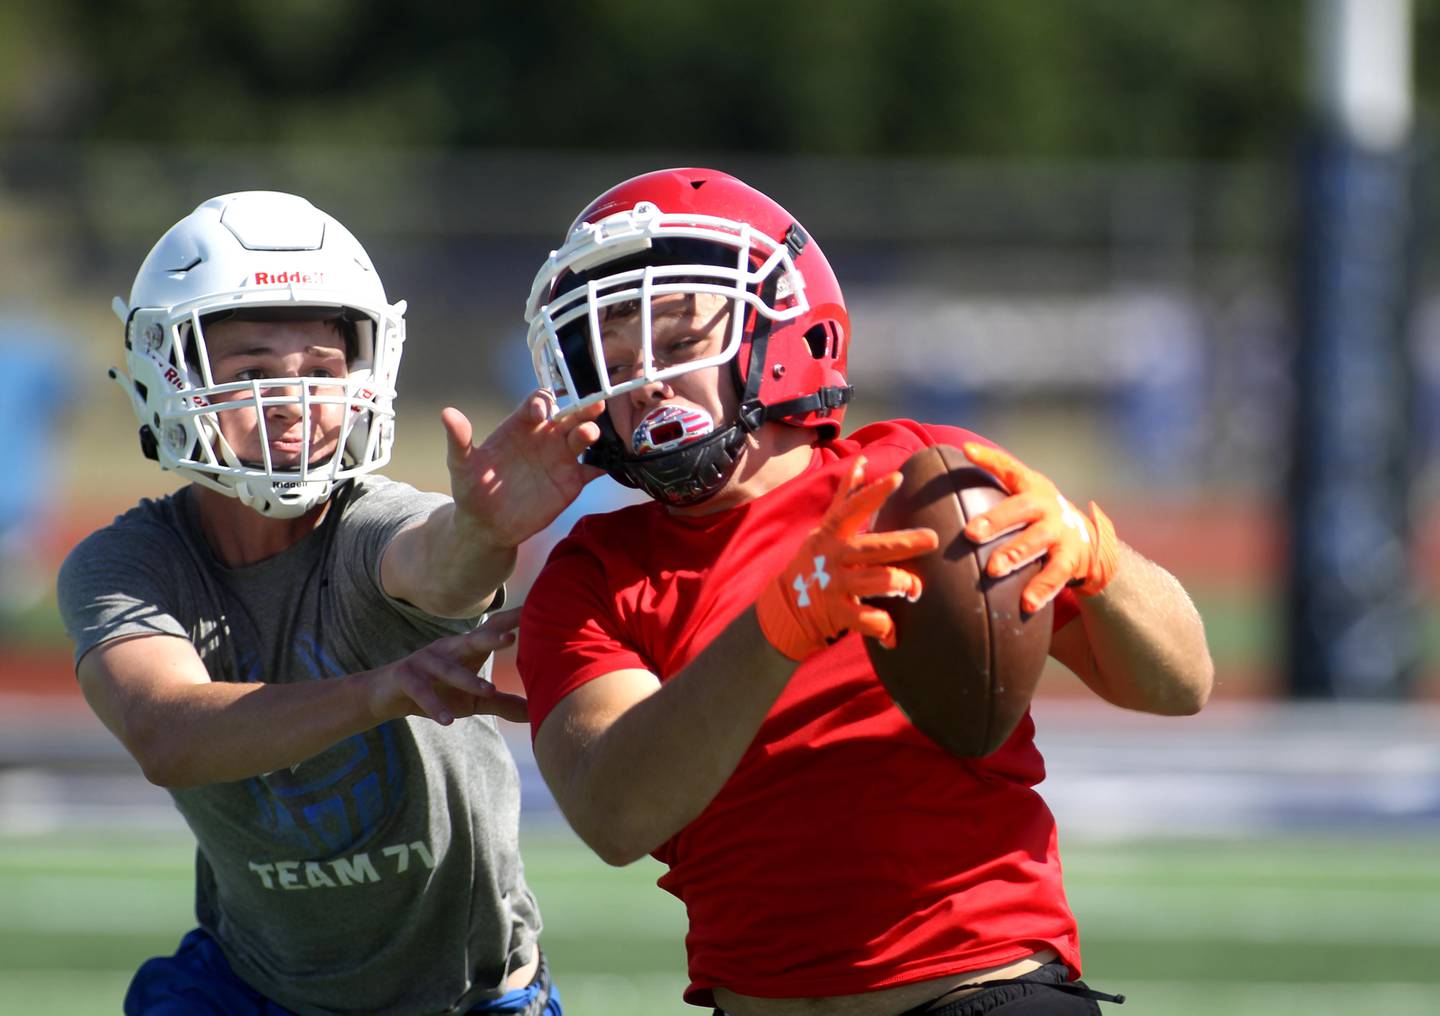 Yorkville’s Colby Henry (right) makes a catch during a 7 on 7 tournament at St. Charles North High School on Thursday, June 30, 2022.